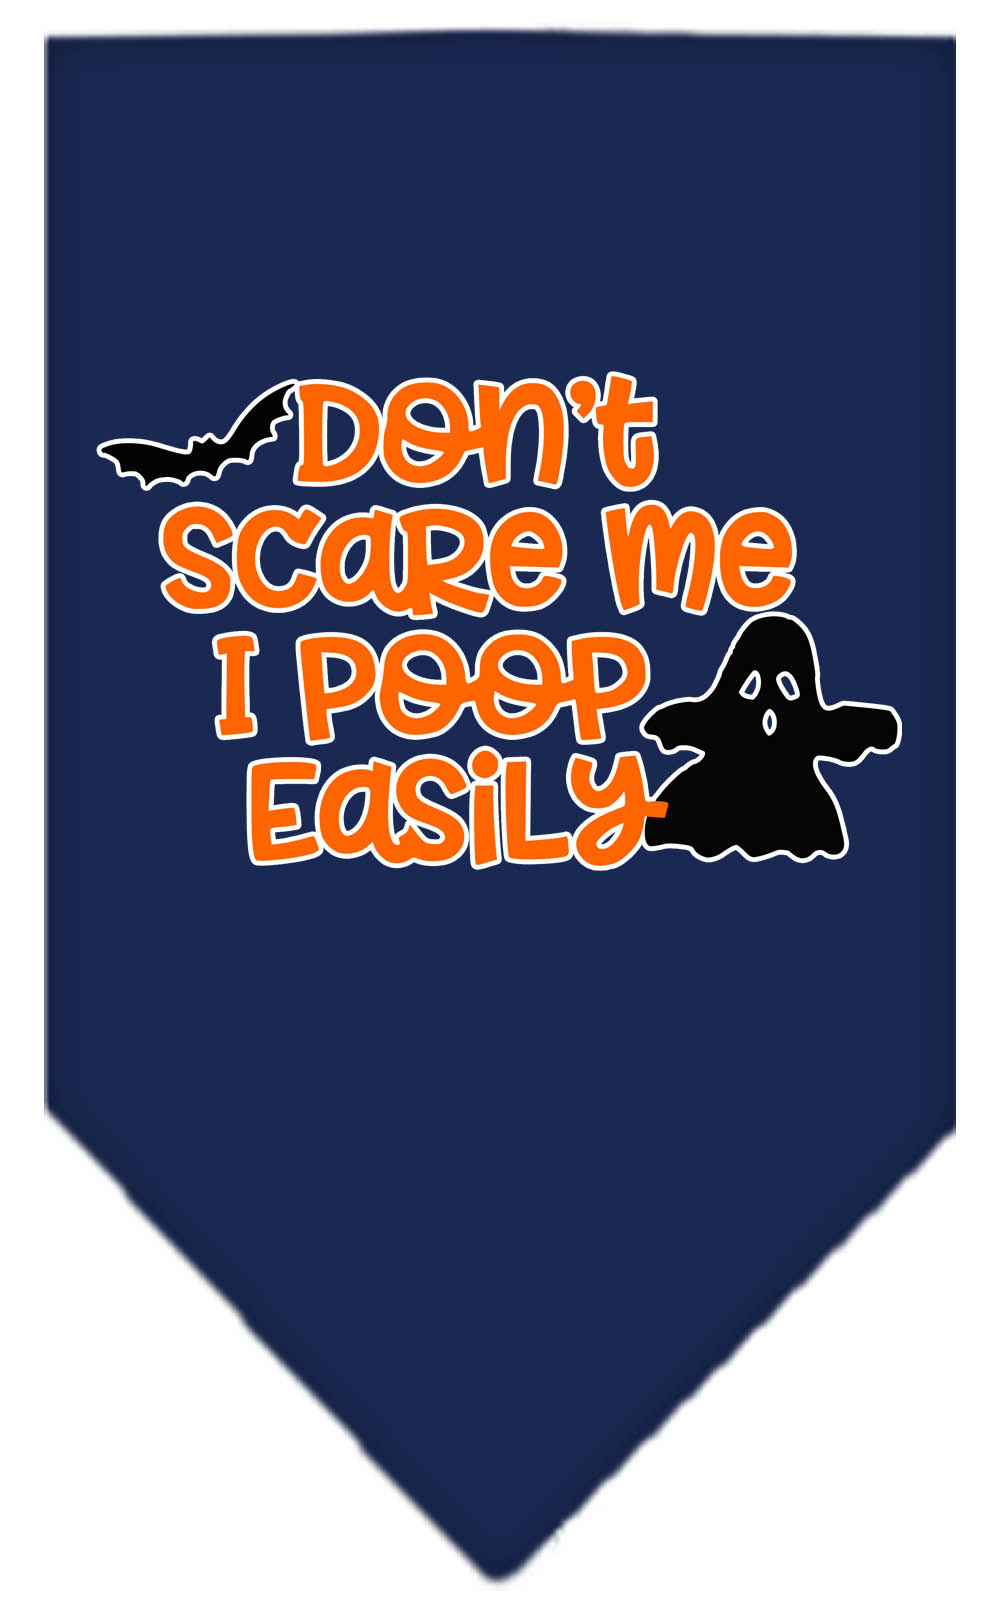 Don't Scare Me, Poops Easily Screen Print Bandana Navy Blue Small